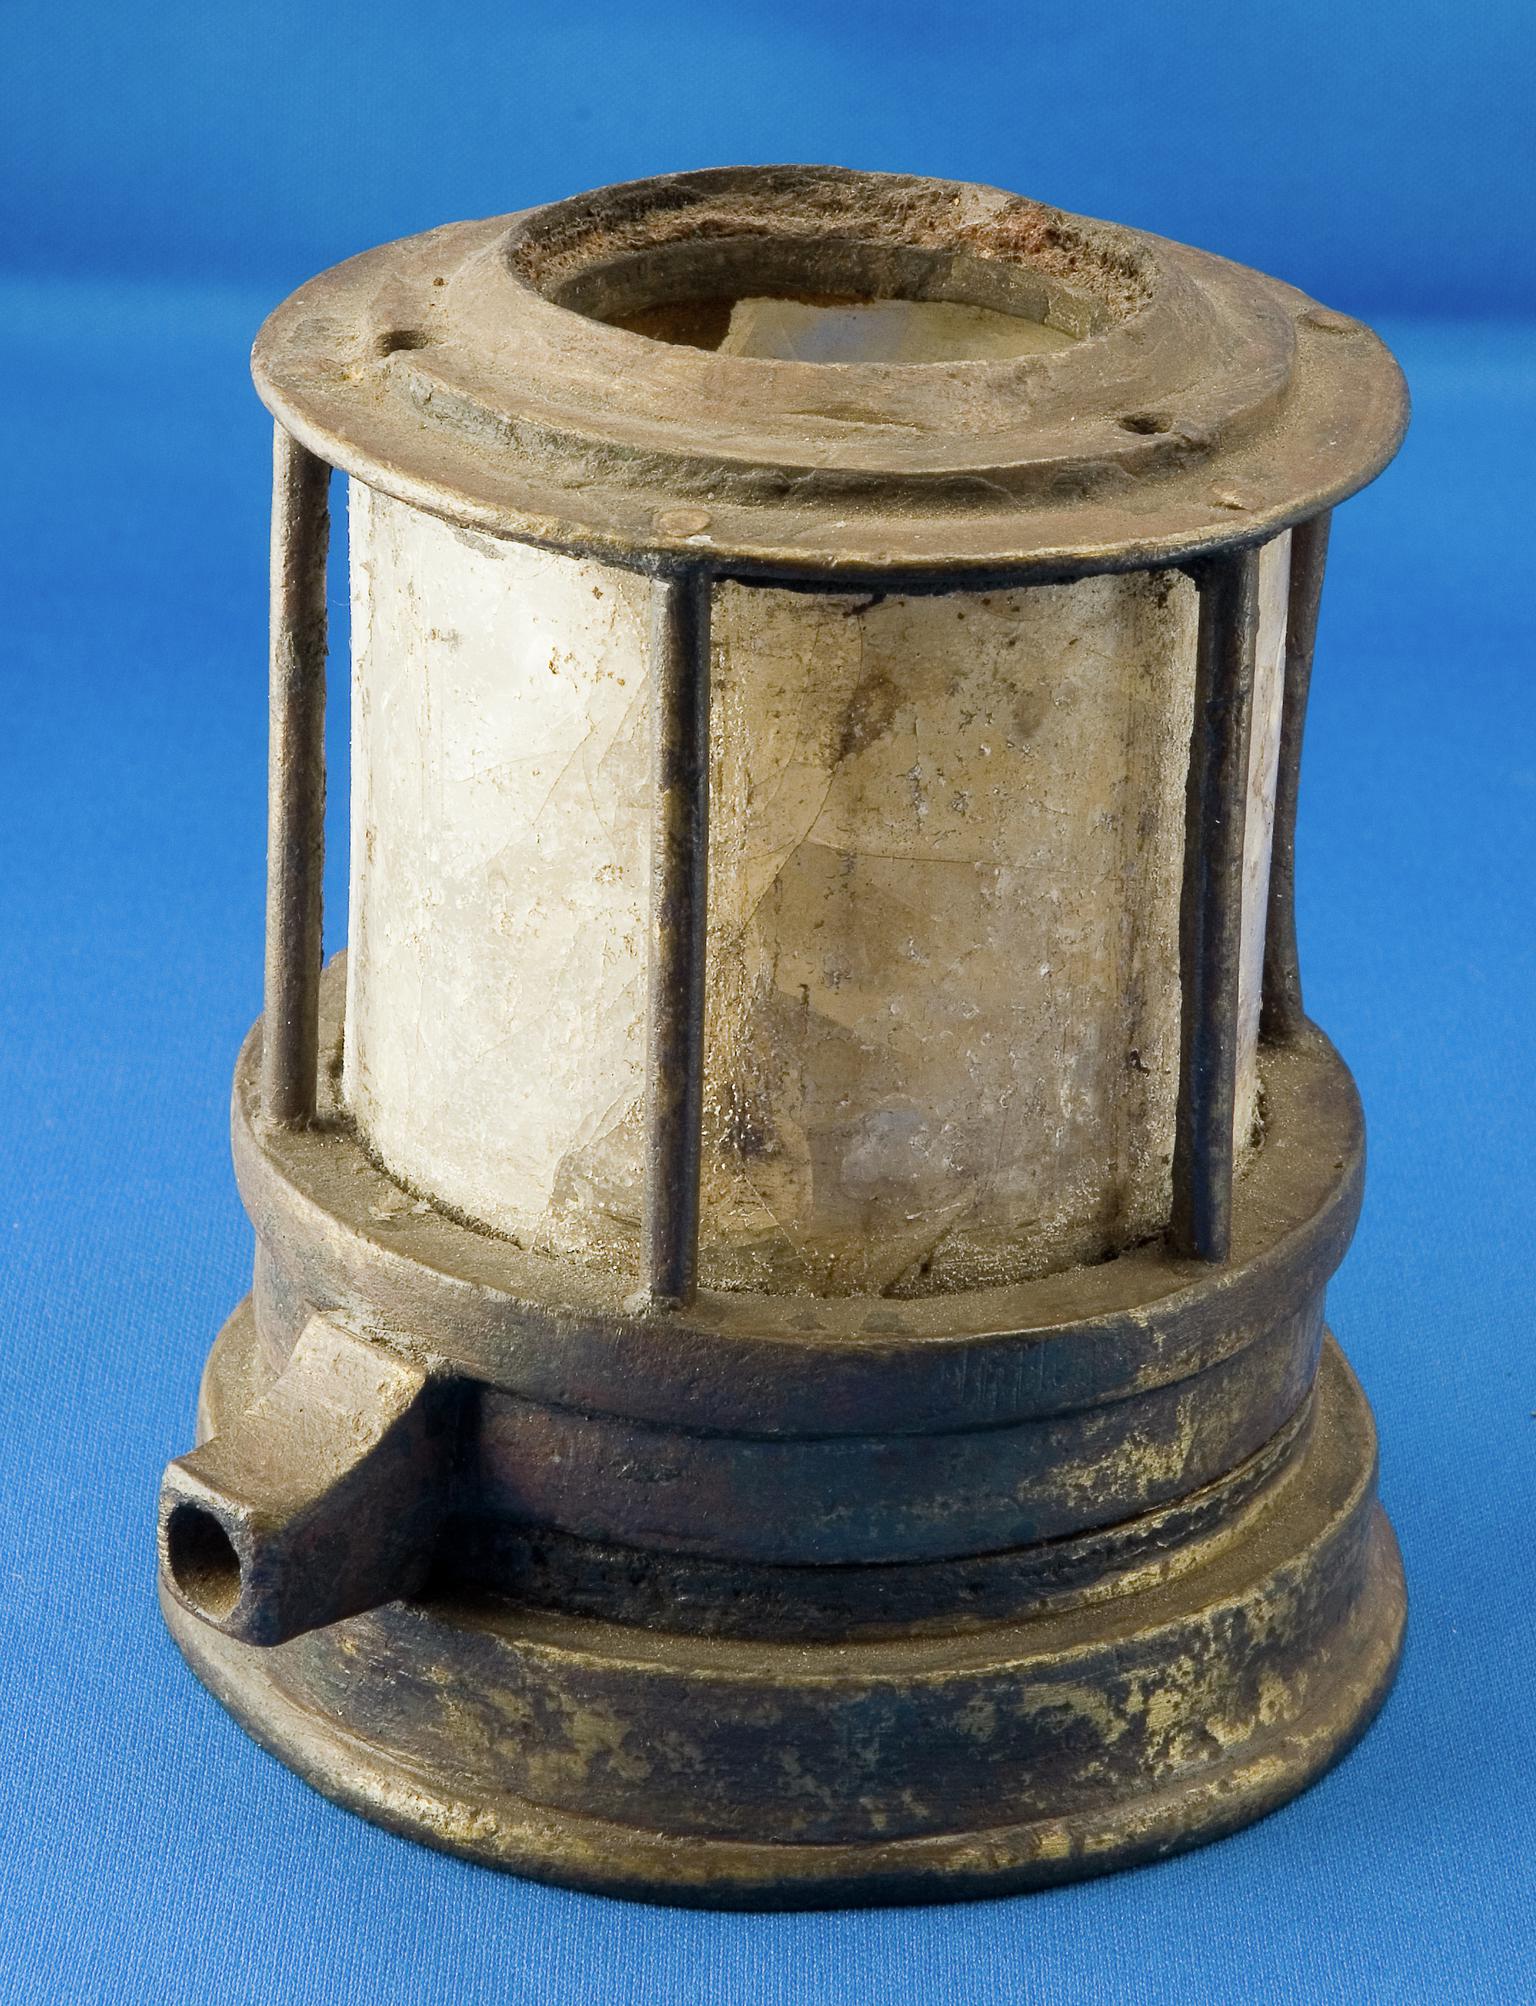 Clanny flame safety lamp